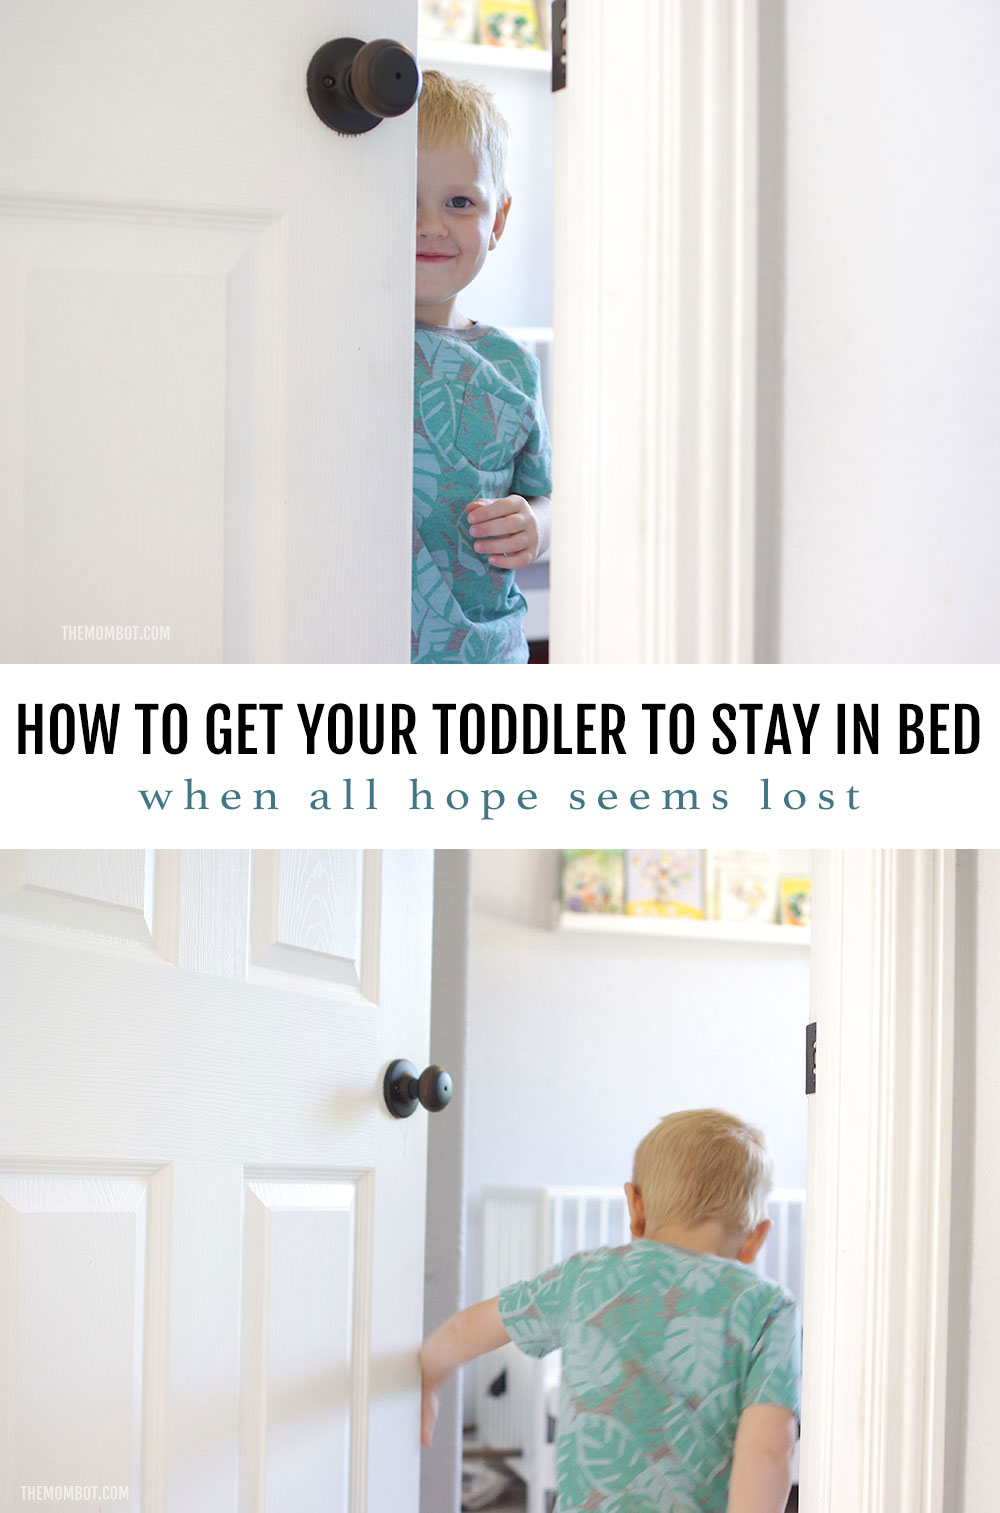 how to get your toddler to stay in bed, bedtime advice, parenting advice, toddler bedtime